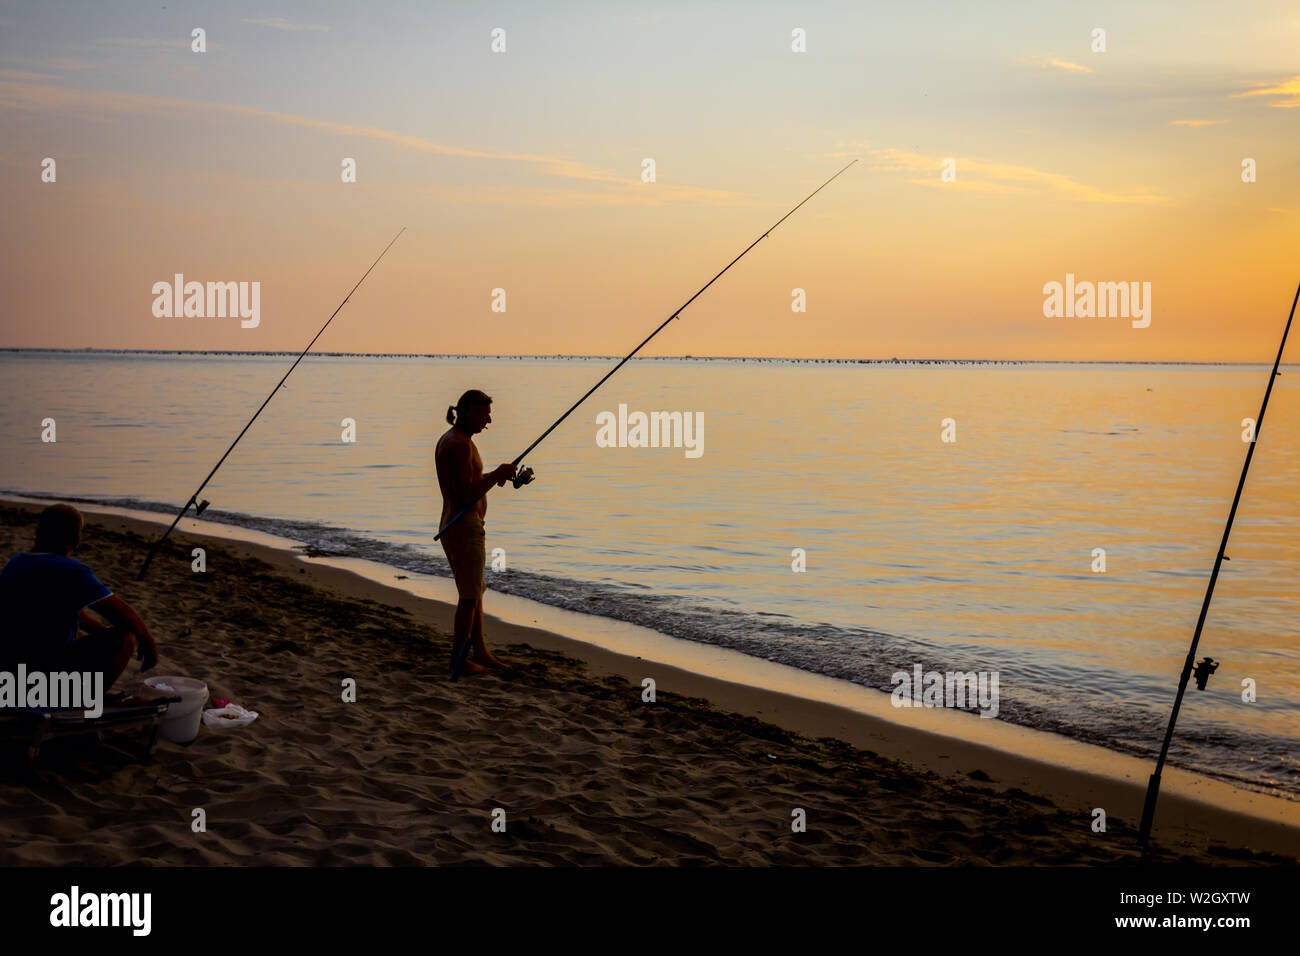 https://c8.alamy.com/comp/W2GXTW/two-buddies-are-catching-fish-from-the-sandy-beach-with-fishing-rods-sunrise-morning-over-mediterranean-sea-W2GXTW.jpg